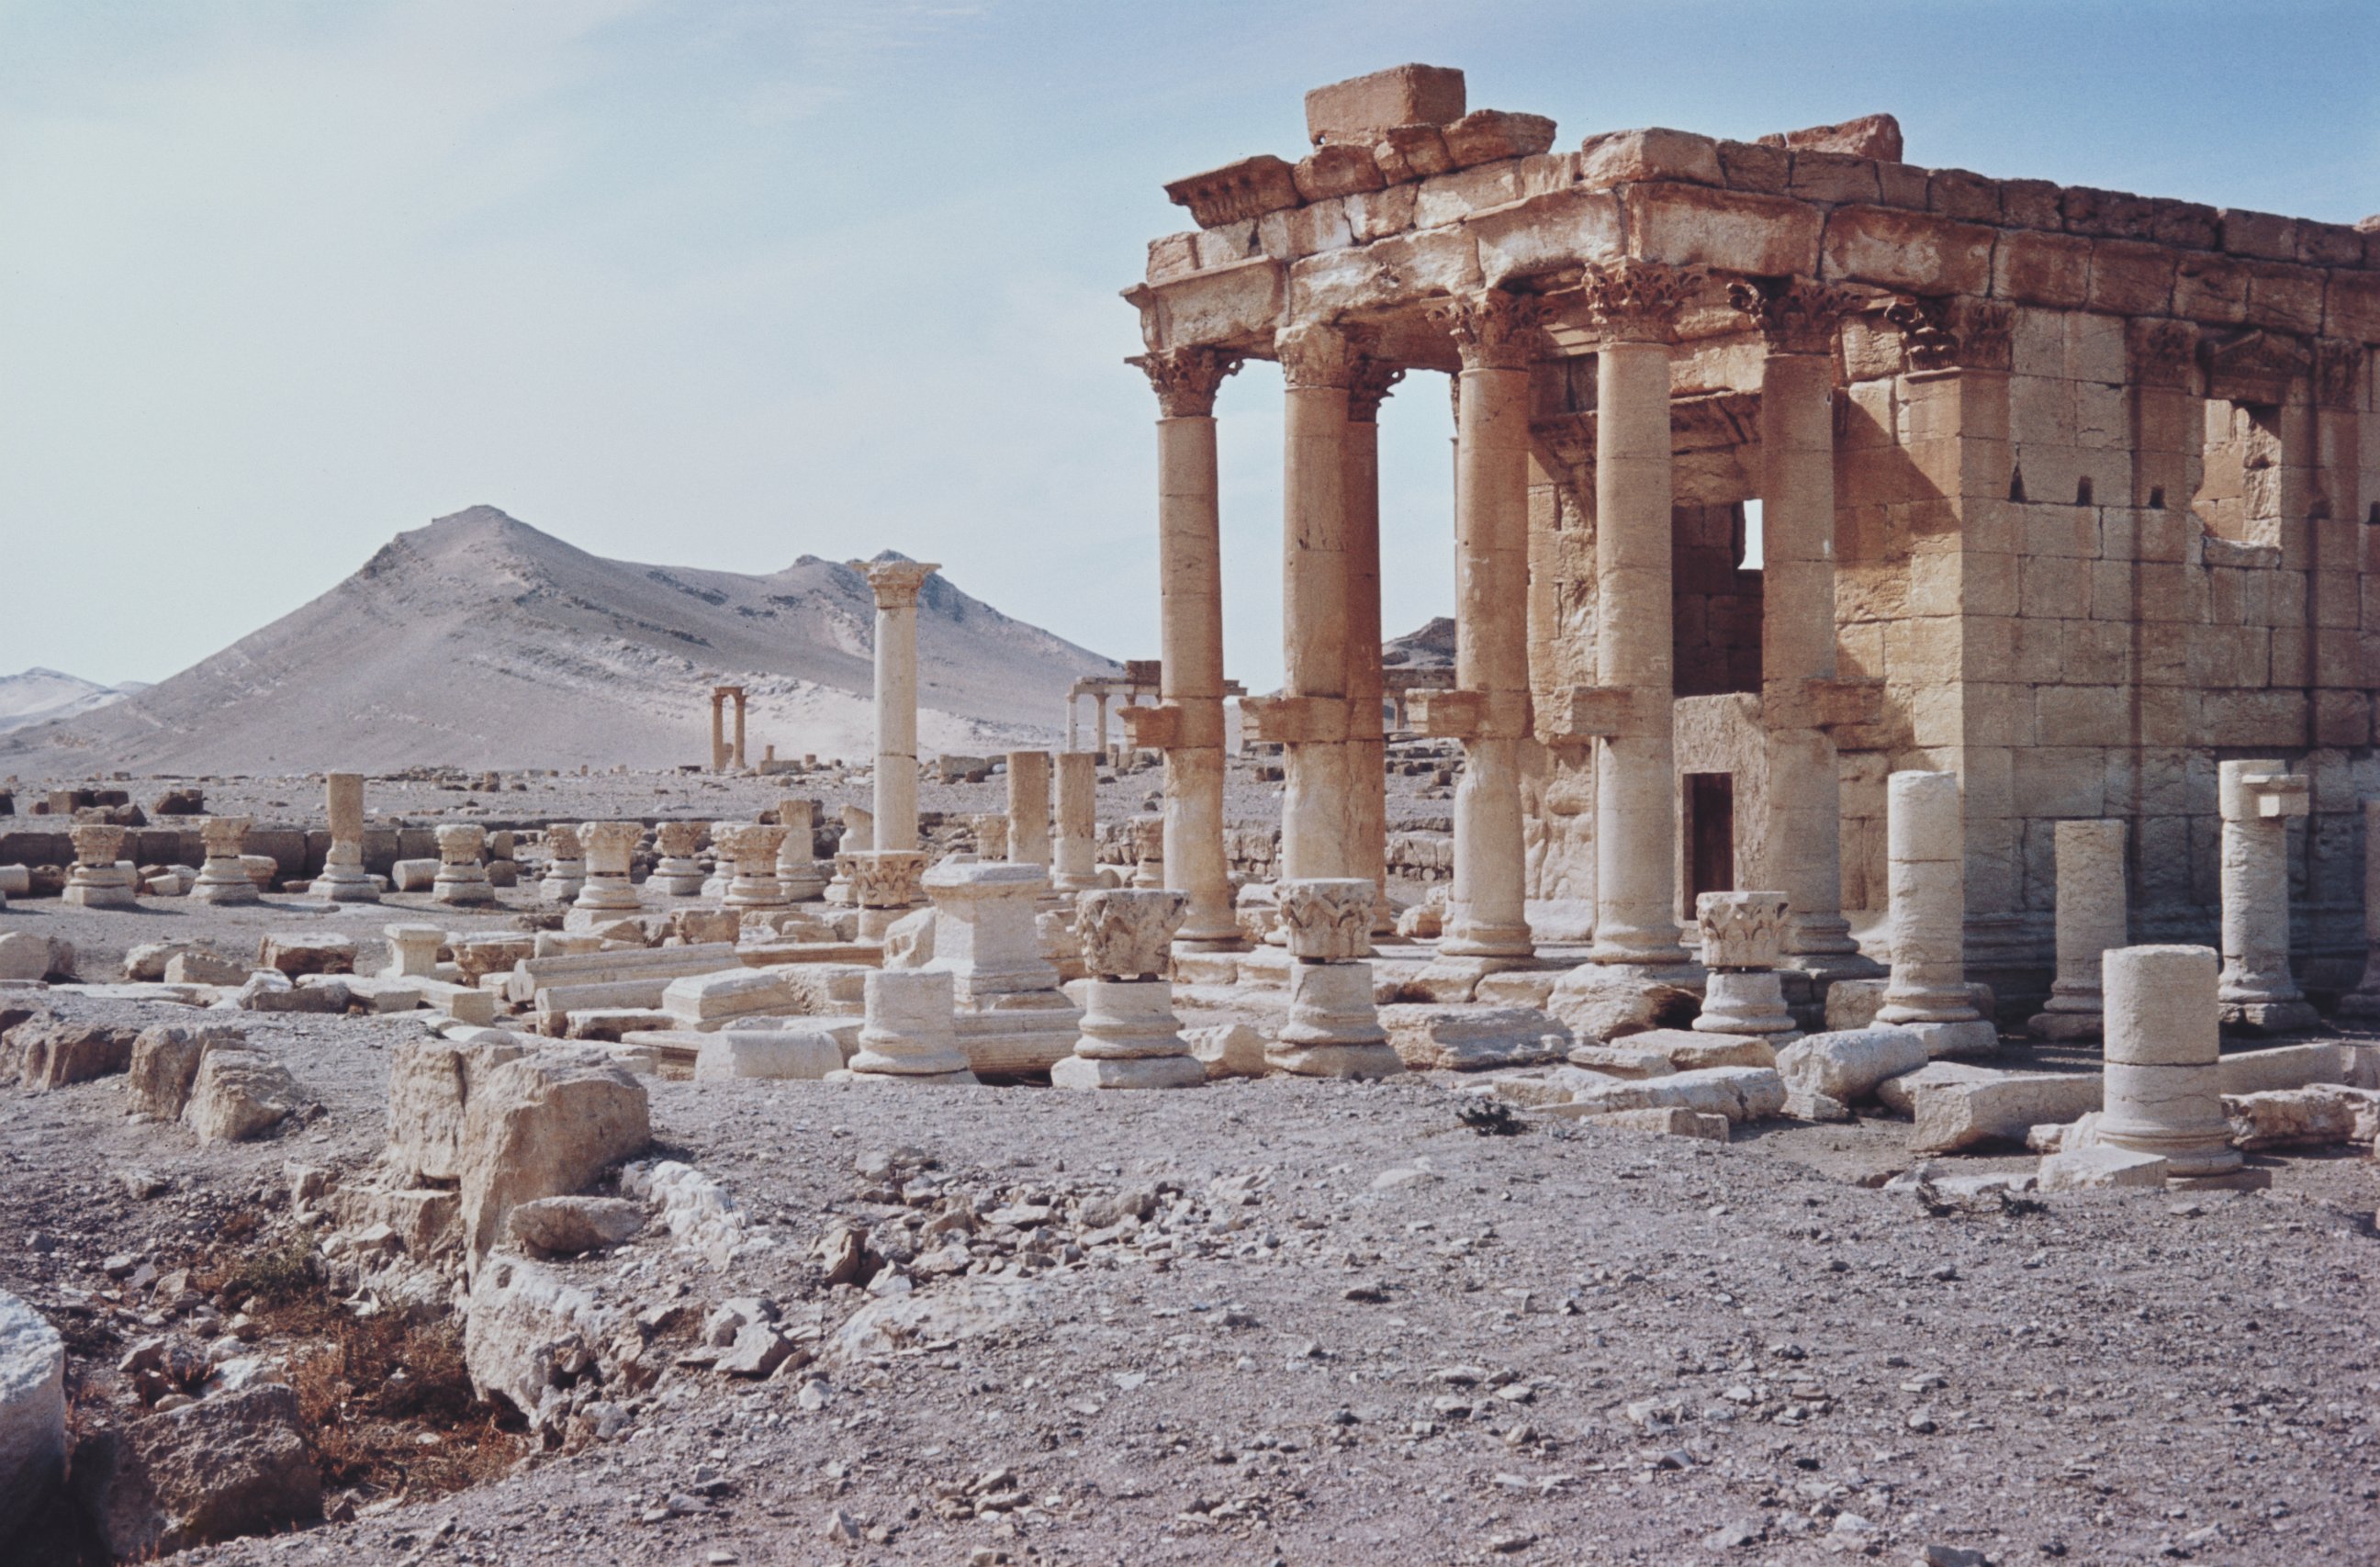 PHOTO: The temple of Baal-Shamin in Palmyra, Syria in an undated photo.